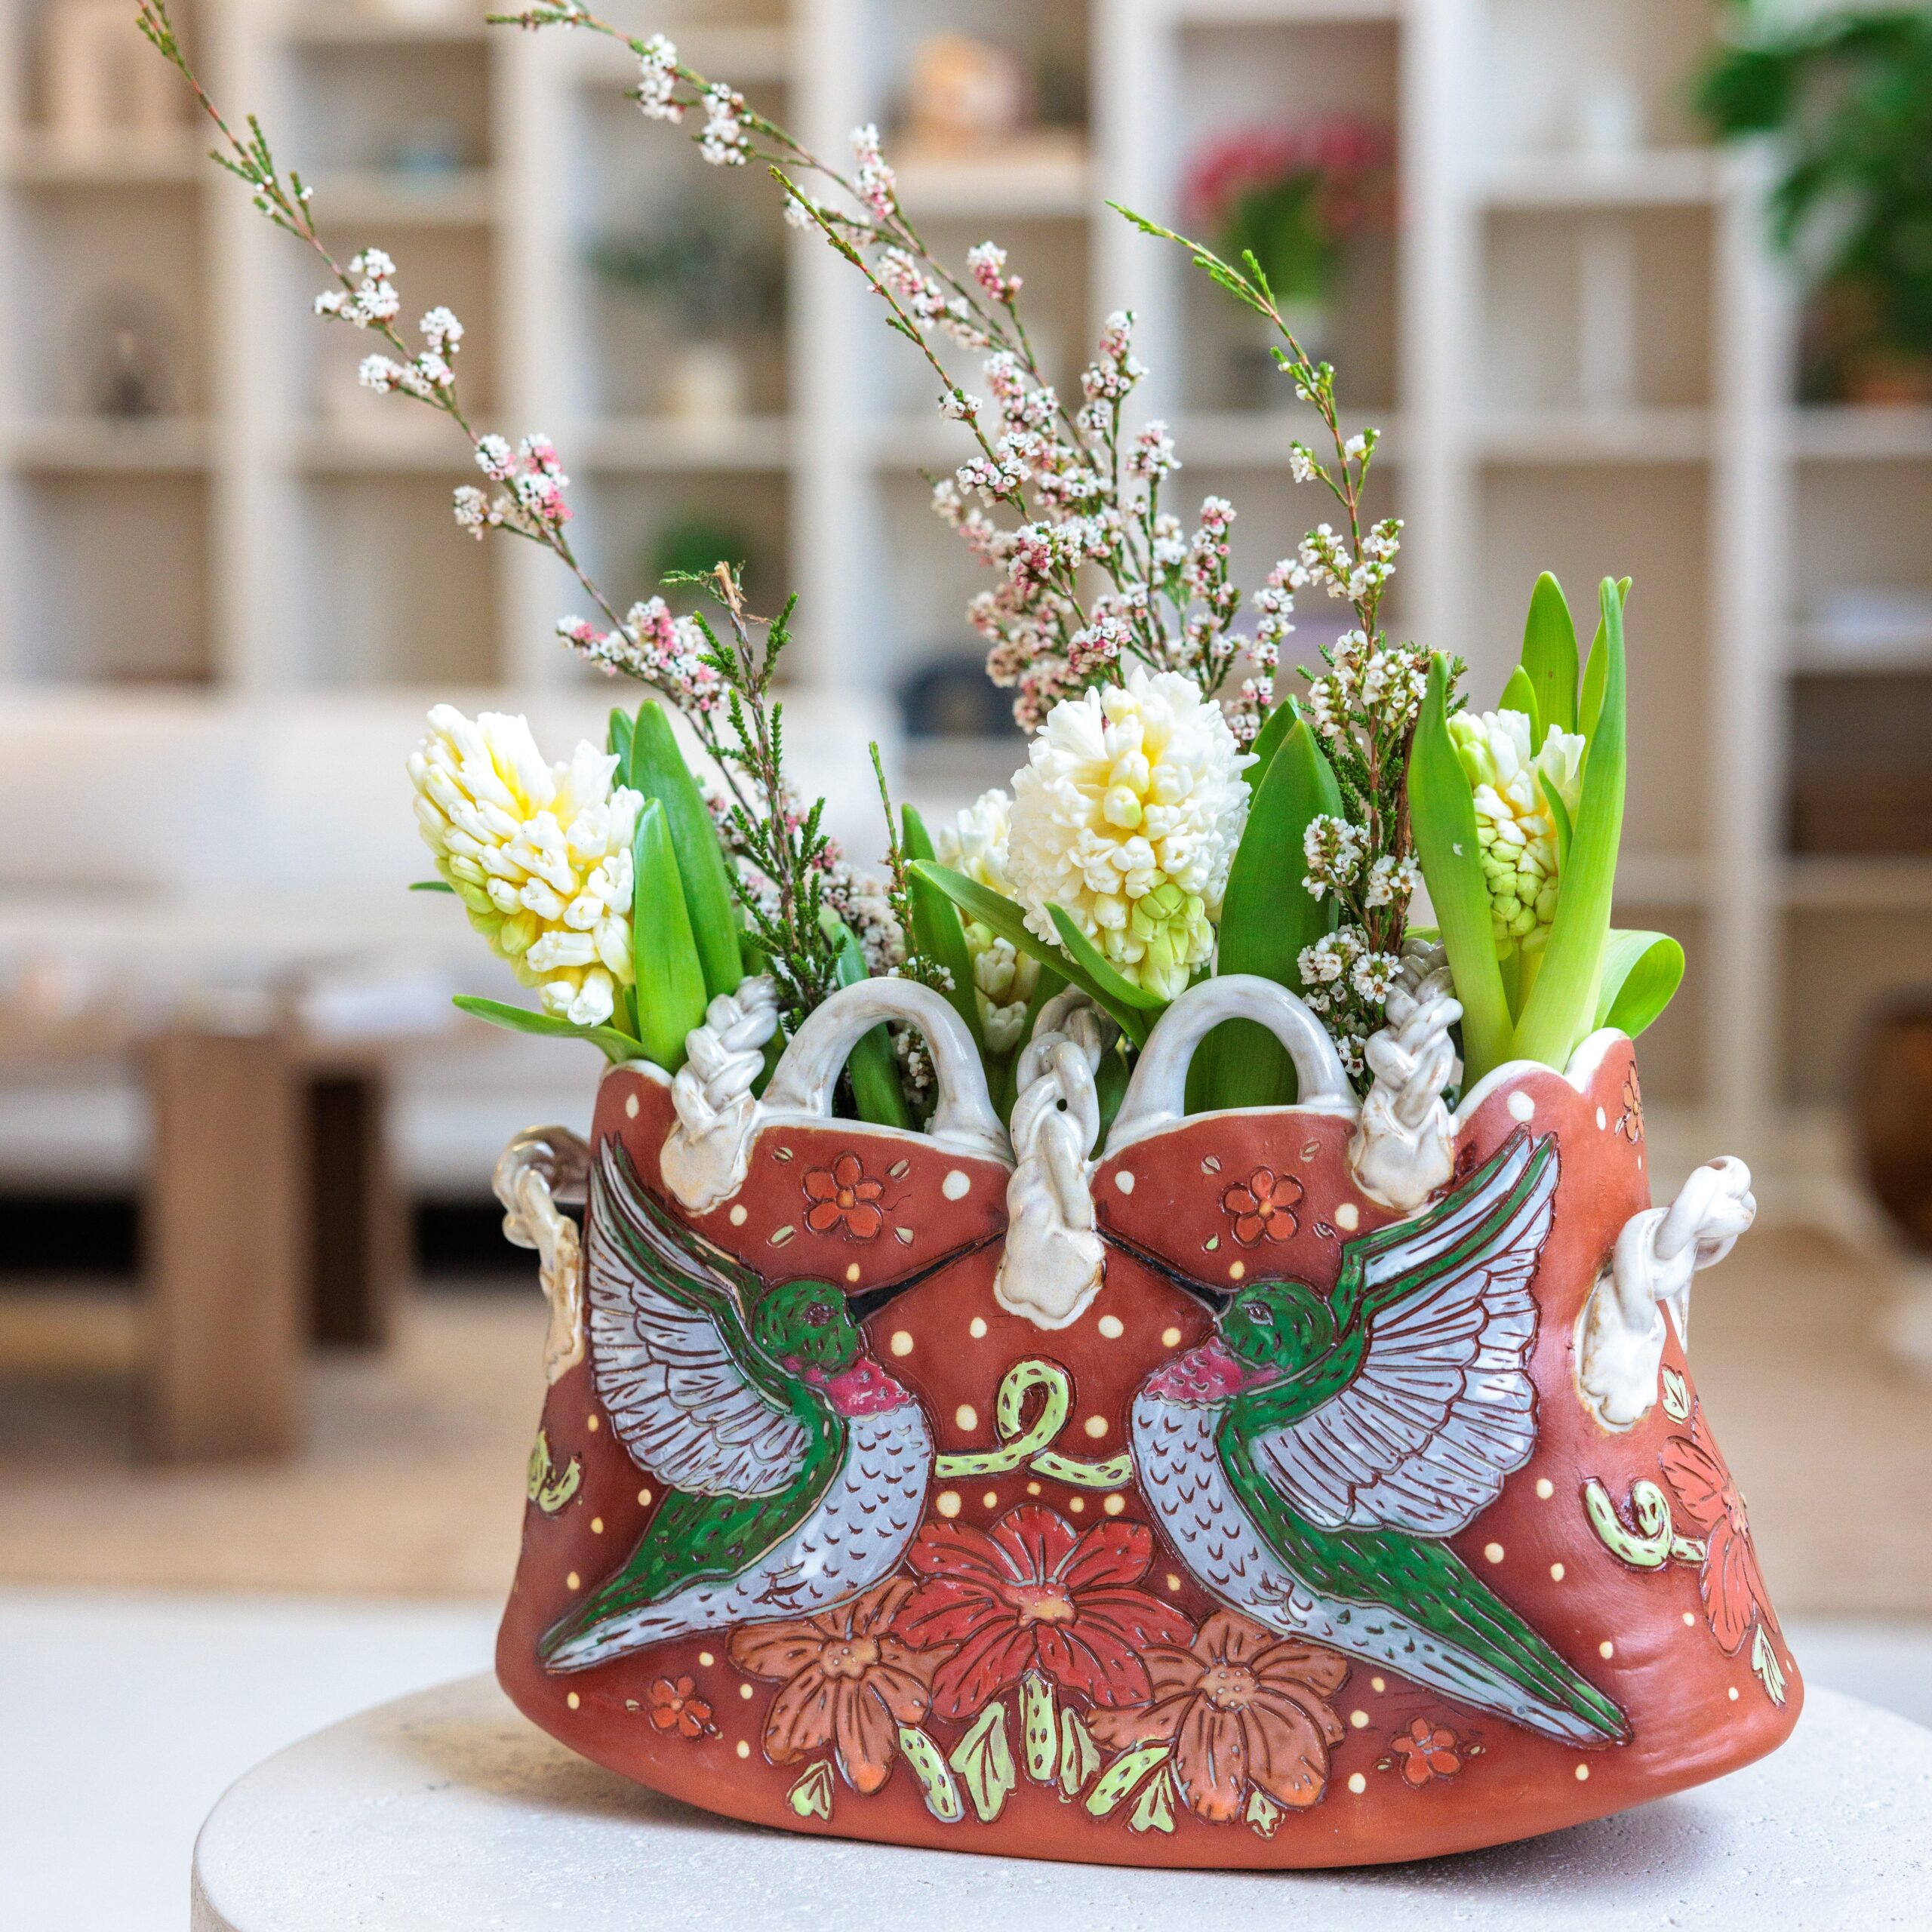 Zoe Pinnell: Hummingbird Basket Product Image 1 of 3